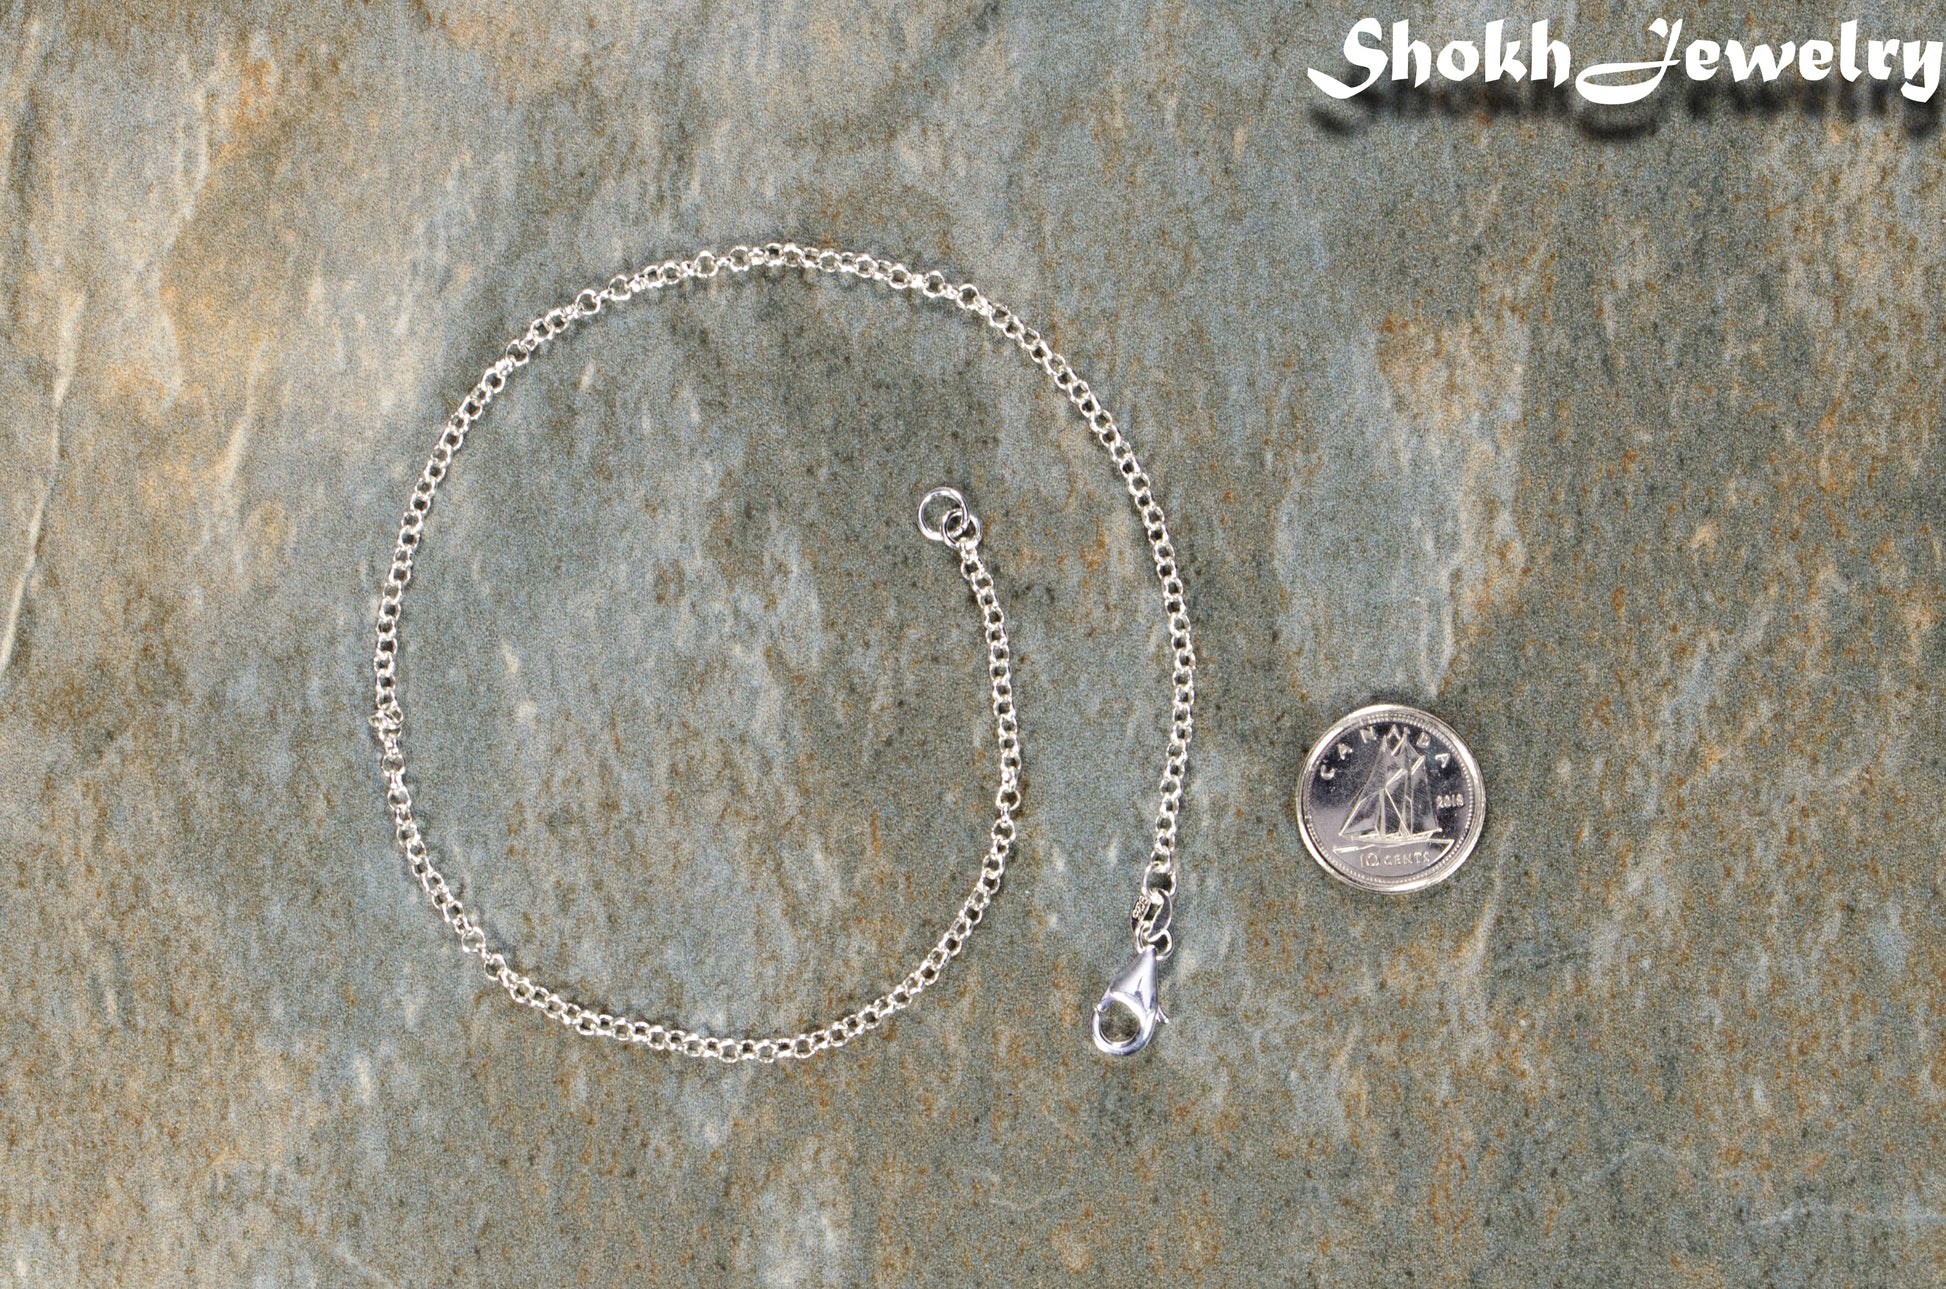 2.5mm Silver Plated Dainty Chain Anklet beside a dime.